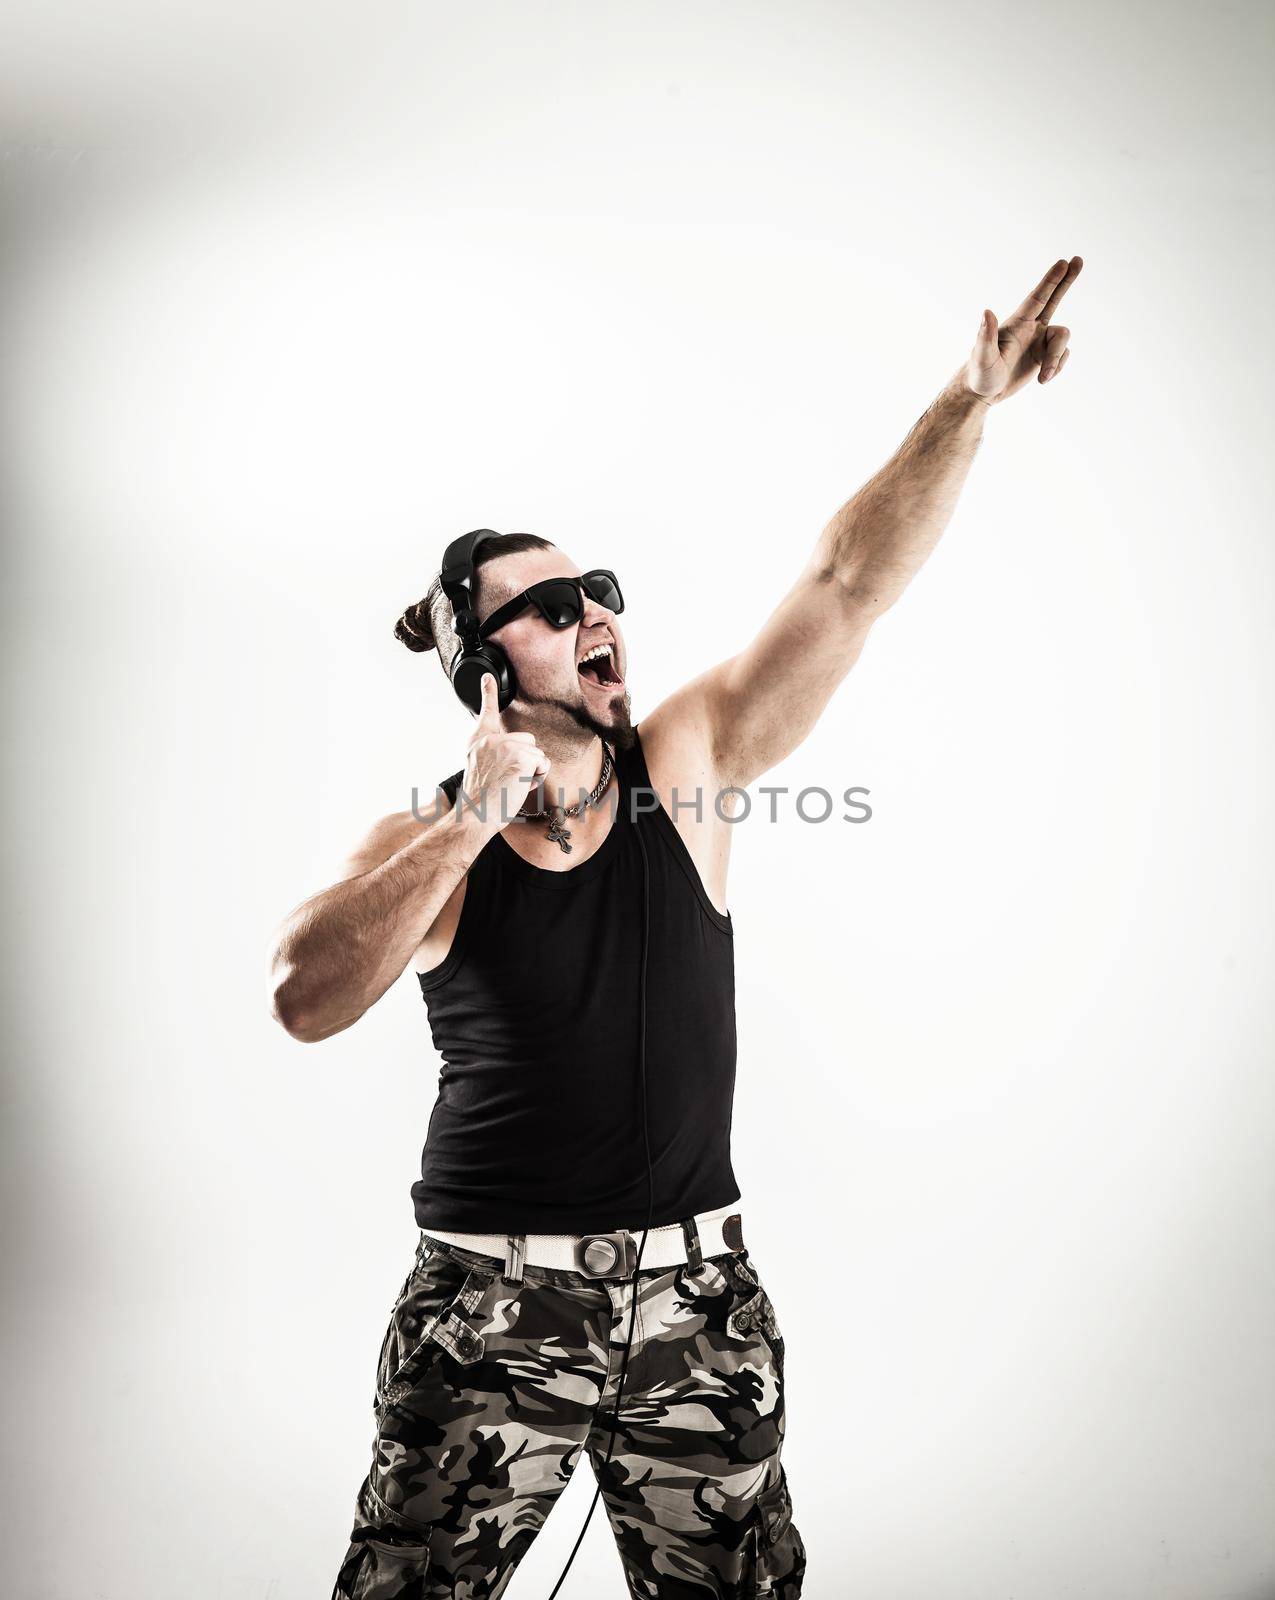 DJ - rapper in headphones takes the rap and break dancing dance on a light background.the photo has a empty space for your text